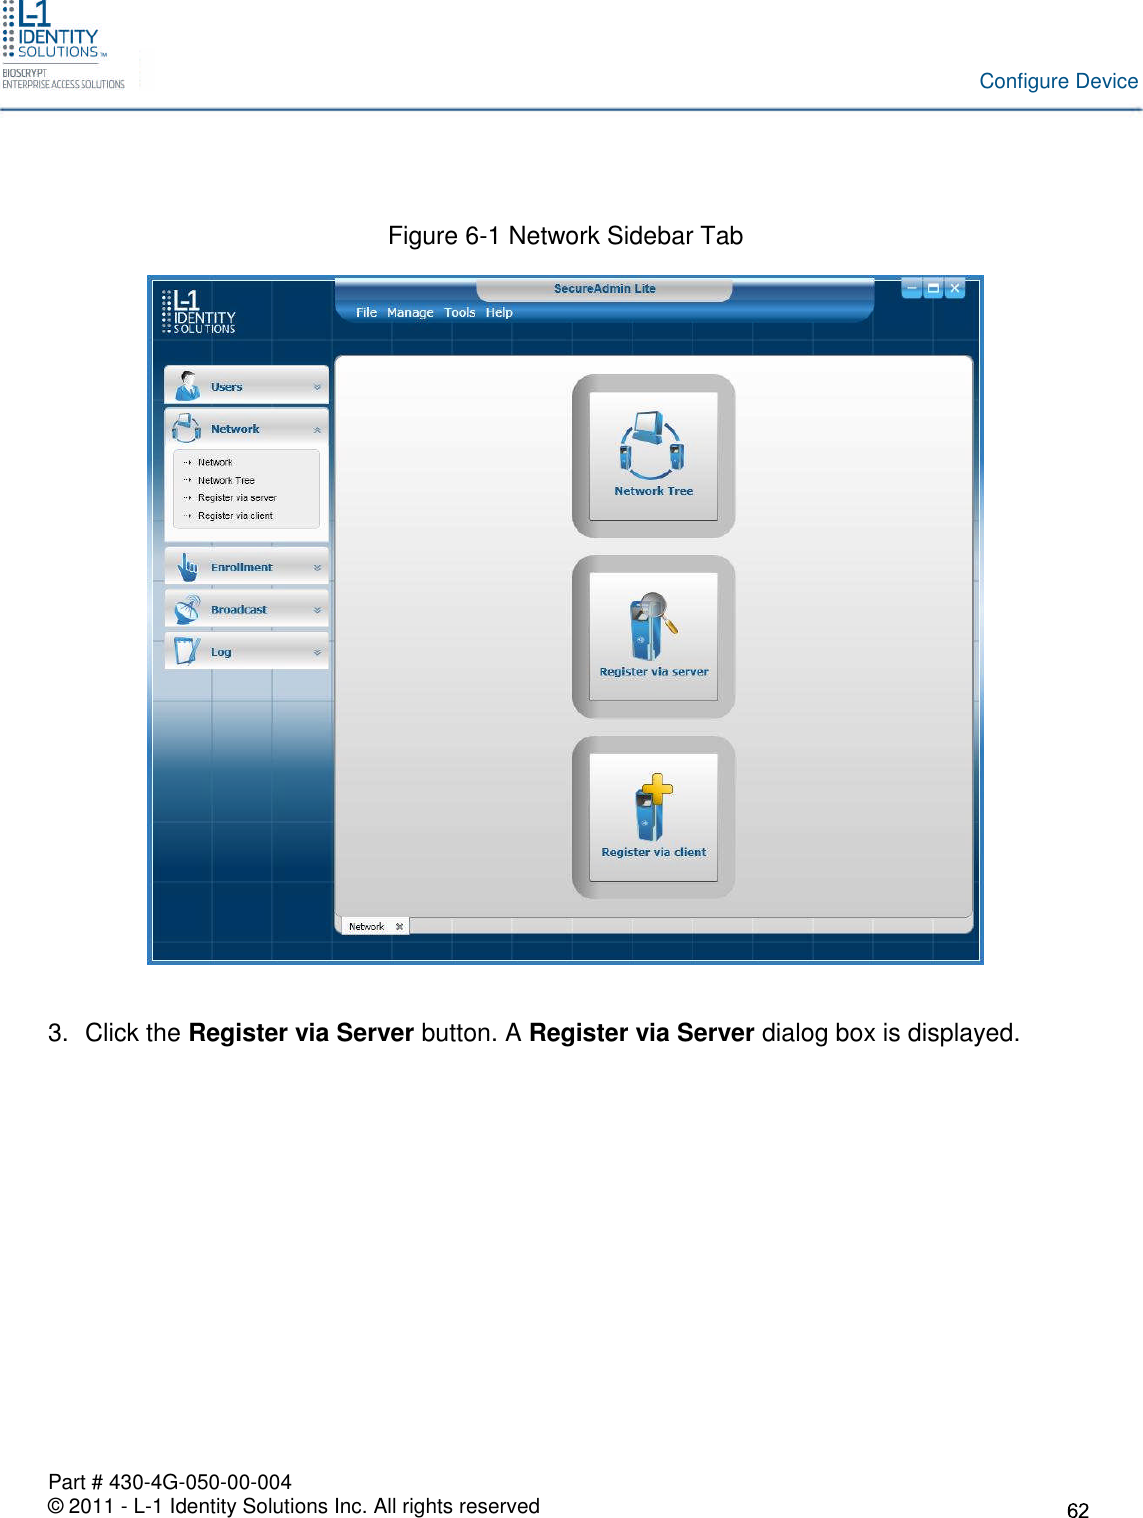 Part # 430-4G-050-00-004© 2011 - L-1 Identity Solutions Inc. All rights reservedConfigure DeviceFigure 6-1 Network Sidebar Tab3. Click the Register via Server button. A Register via Server dialog box is displayed.